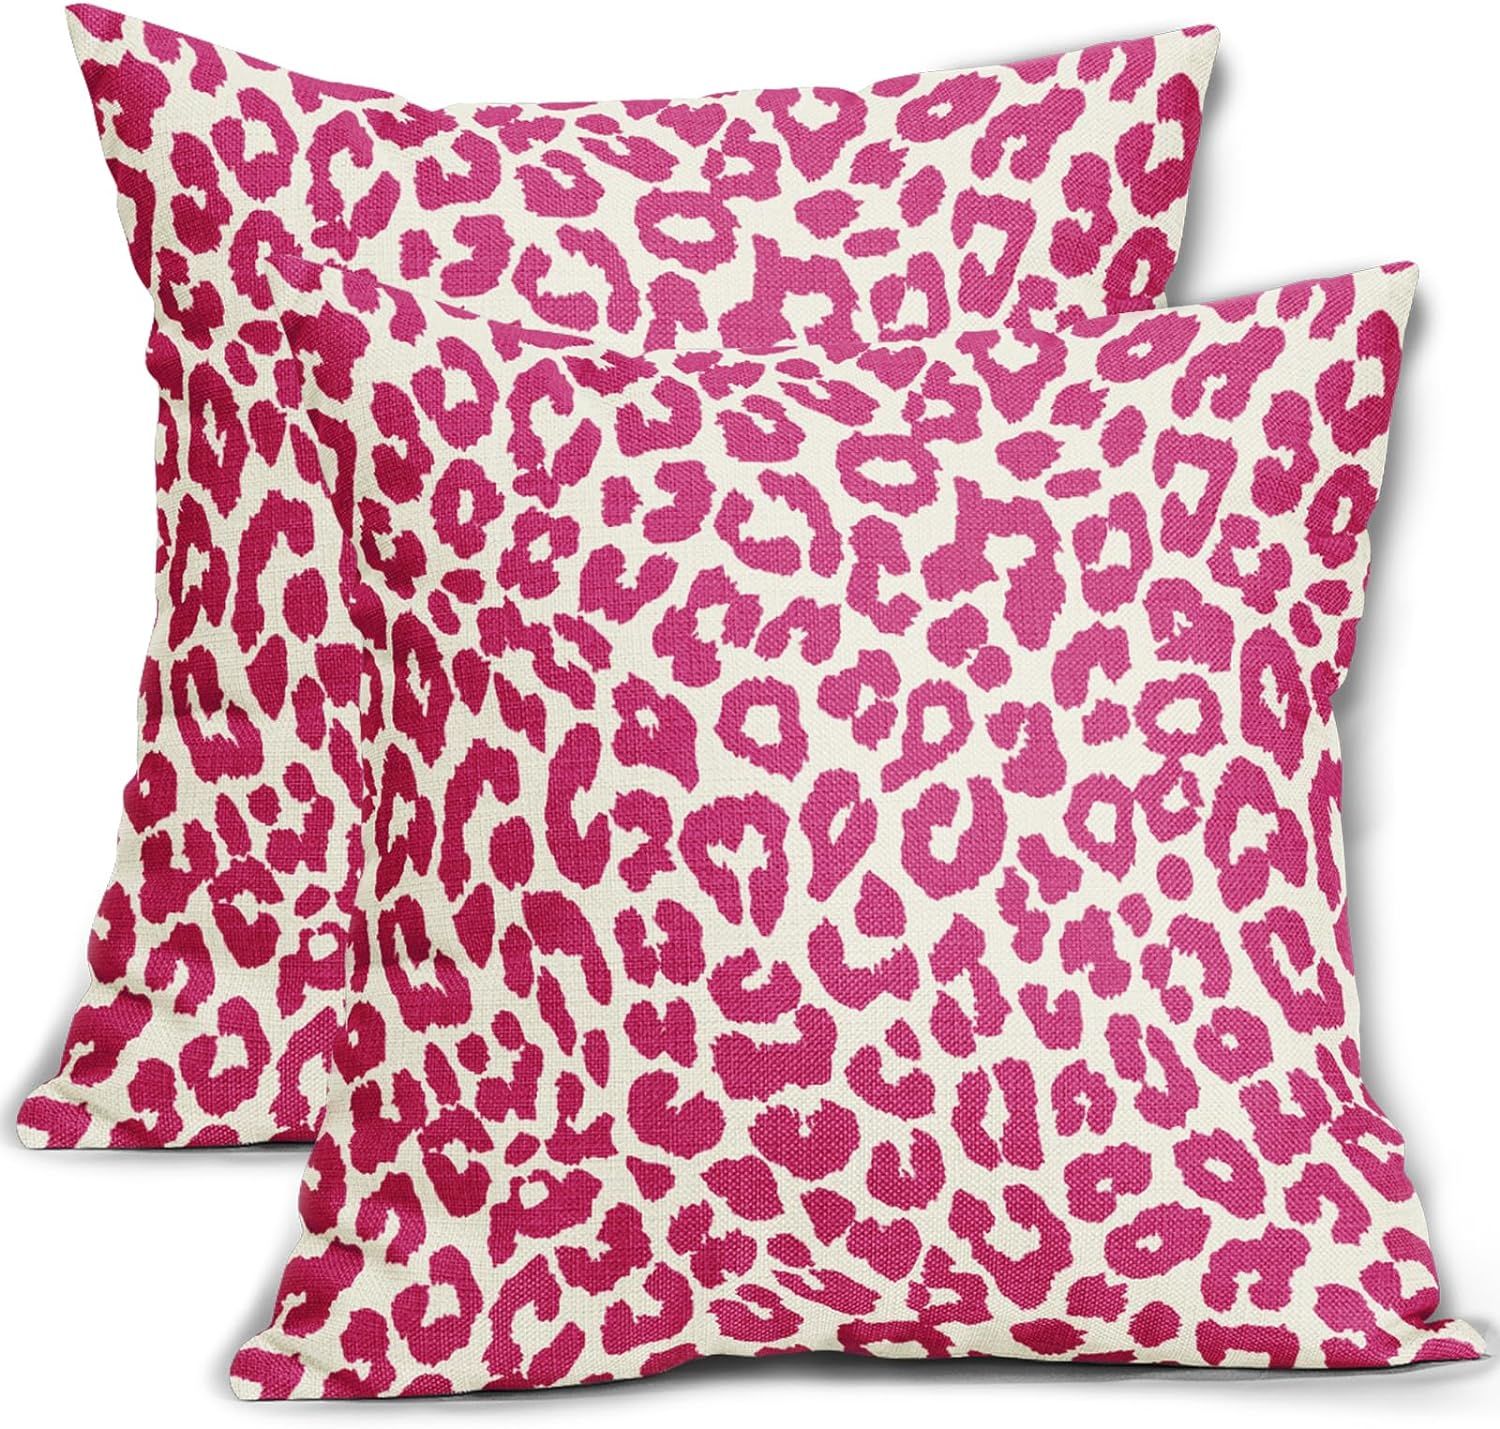 Hot Pink Leopard Print Pillow Covers 18x18 Set of 2 Cheetah Animal Pattern Chinoiserie Decorative... | Amazon (US)